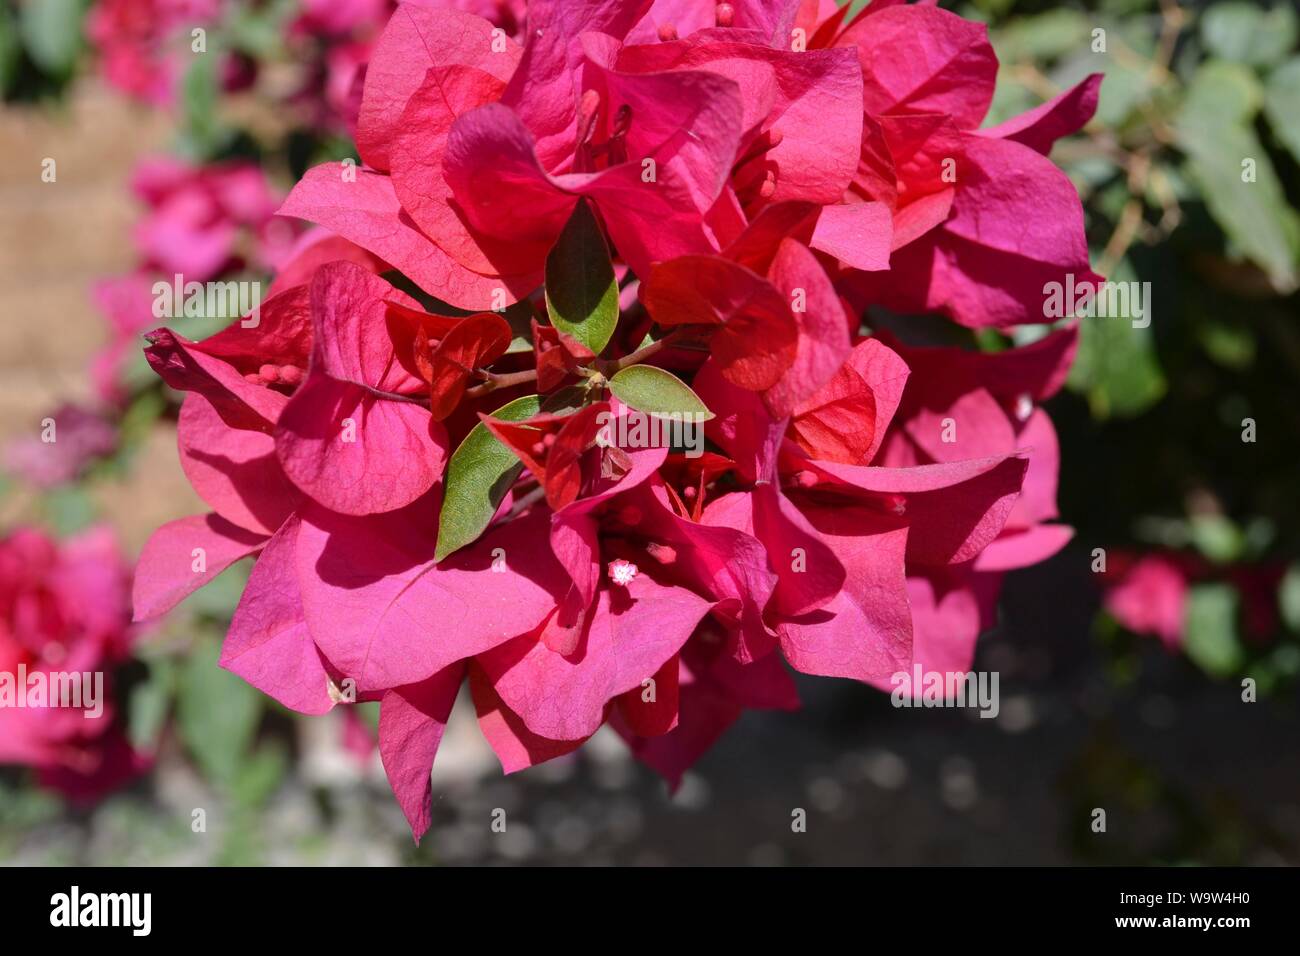 Flowers from a garden. Stock Photo